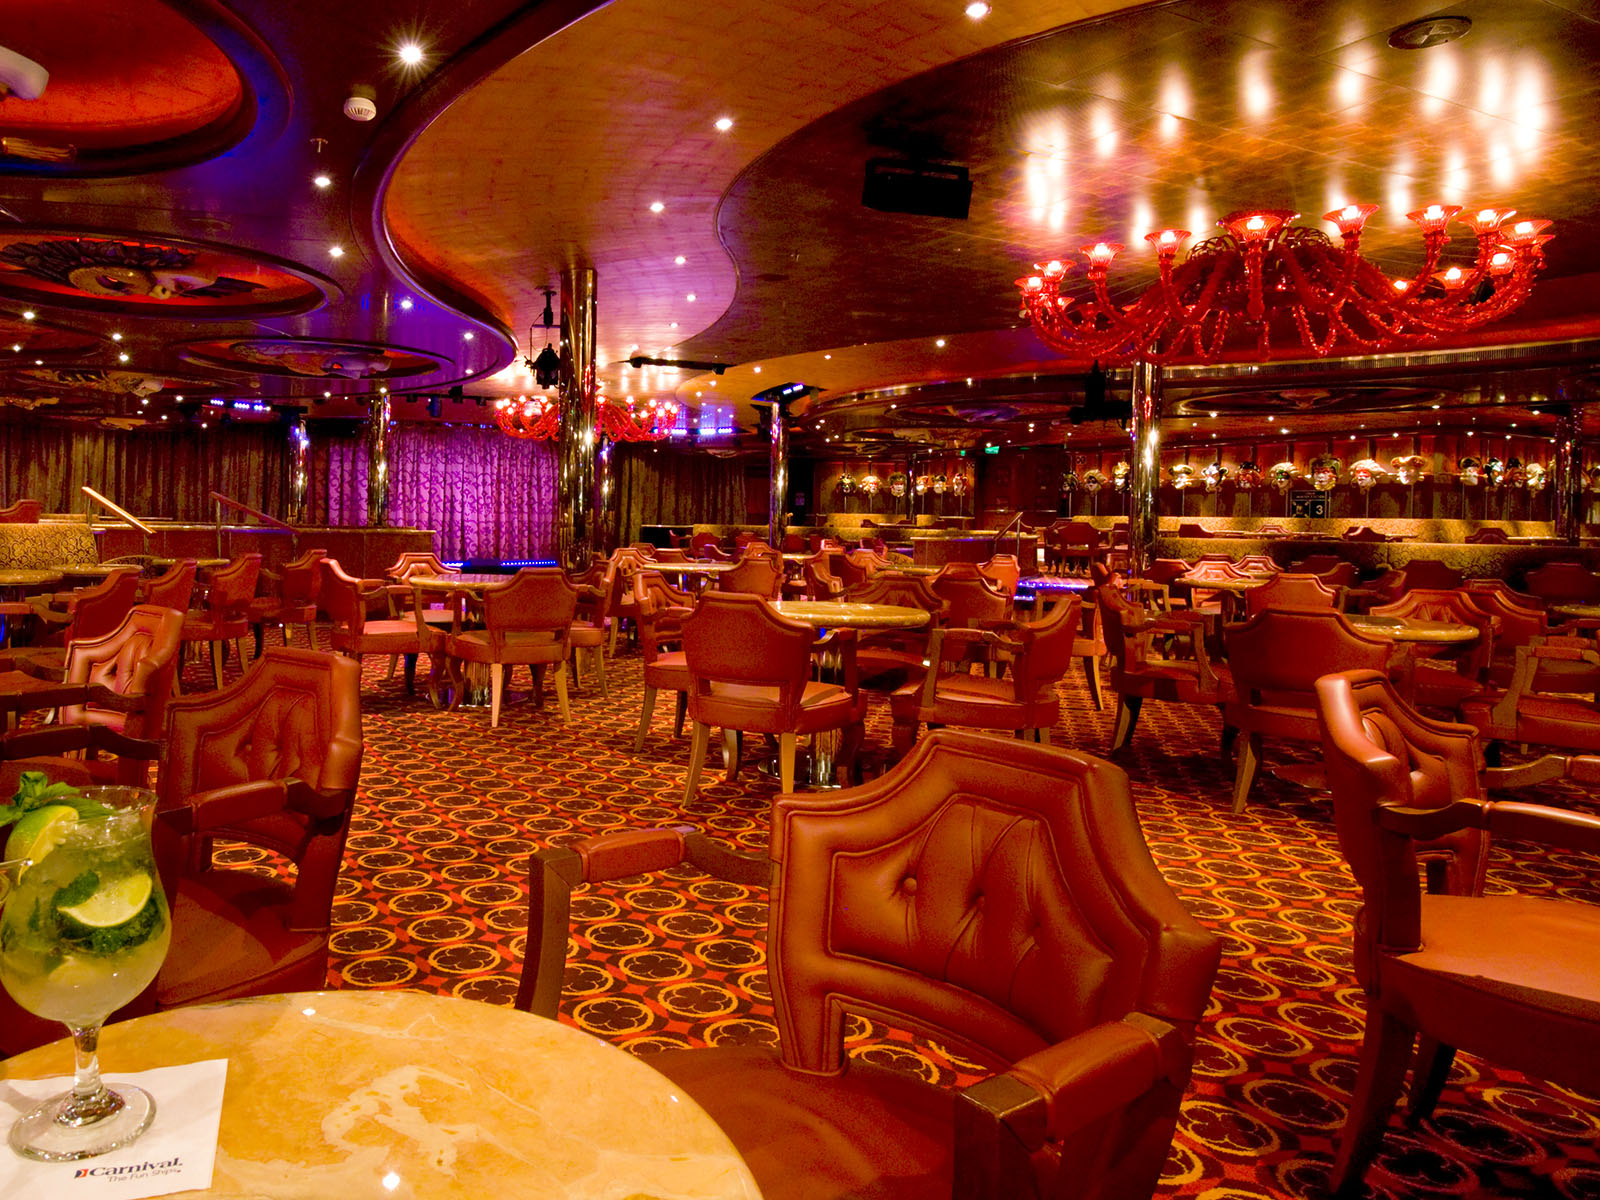 Burgundy Lounge on the Carnival Dream